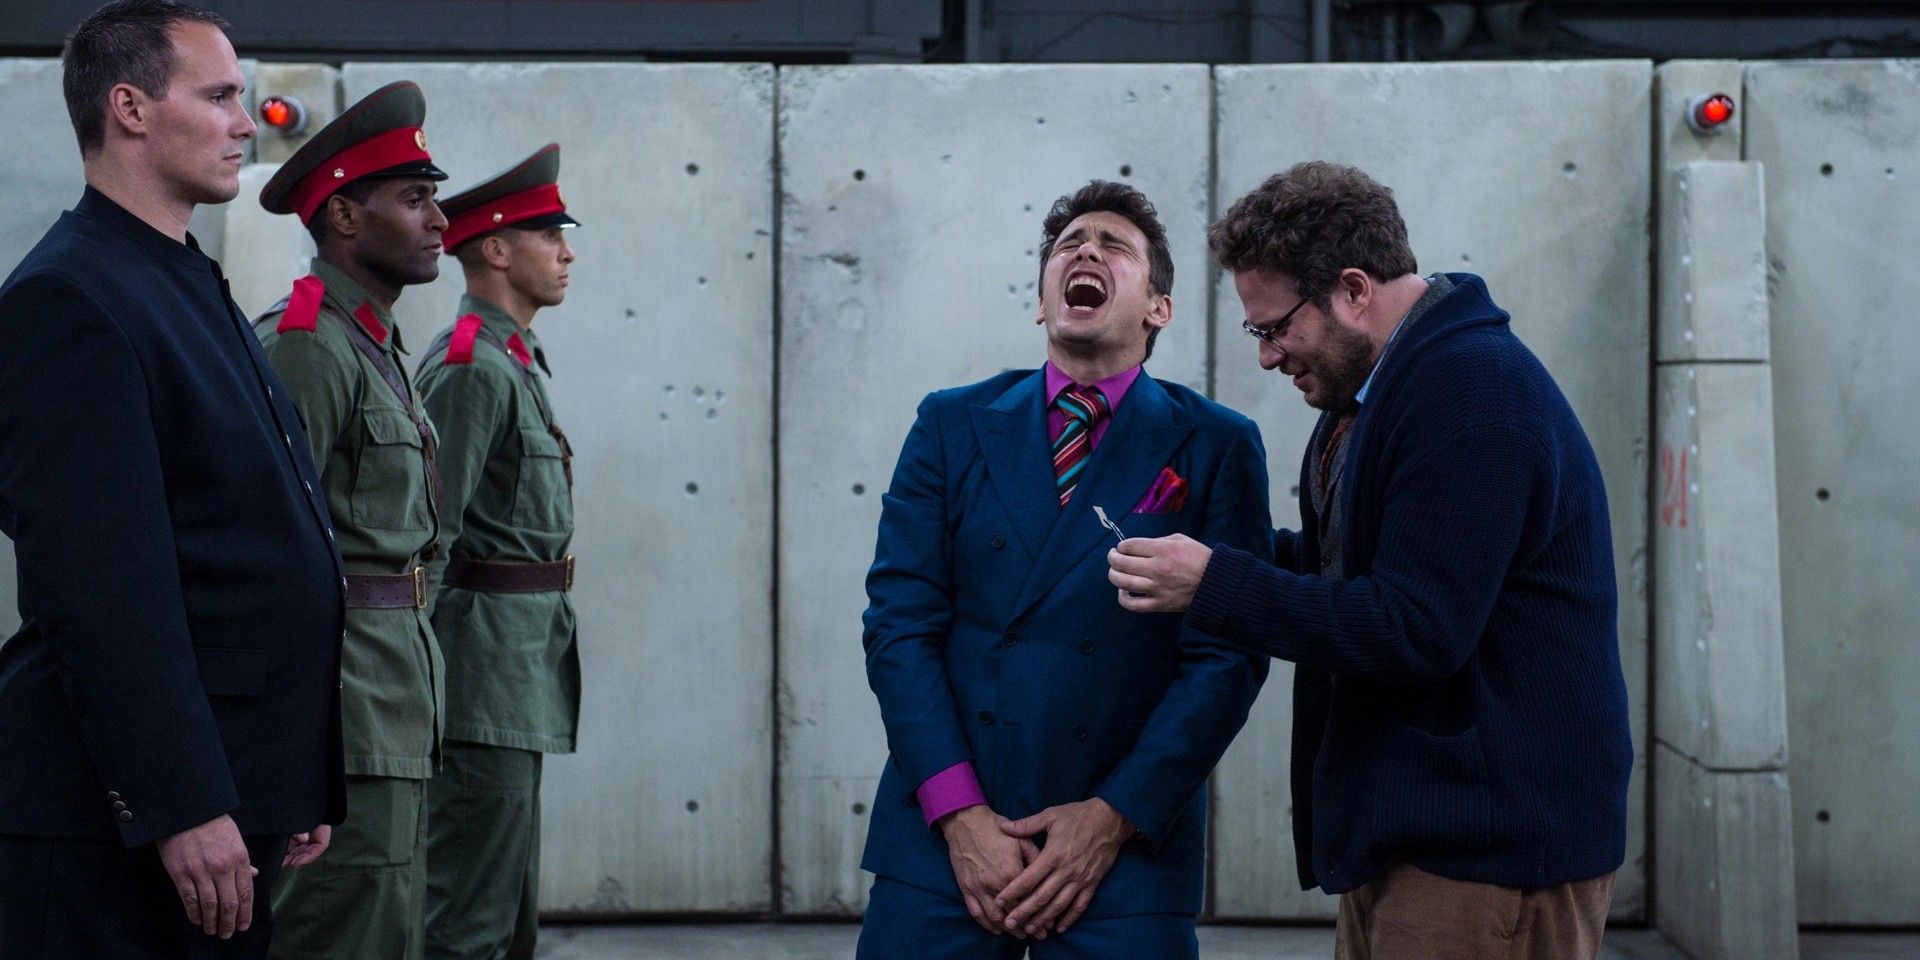 James Franco and Seth Rogen work with the government in the Interview